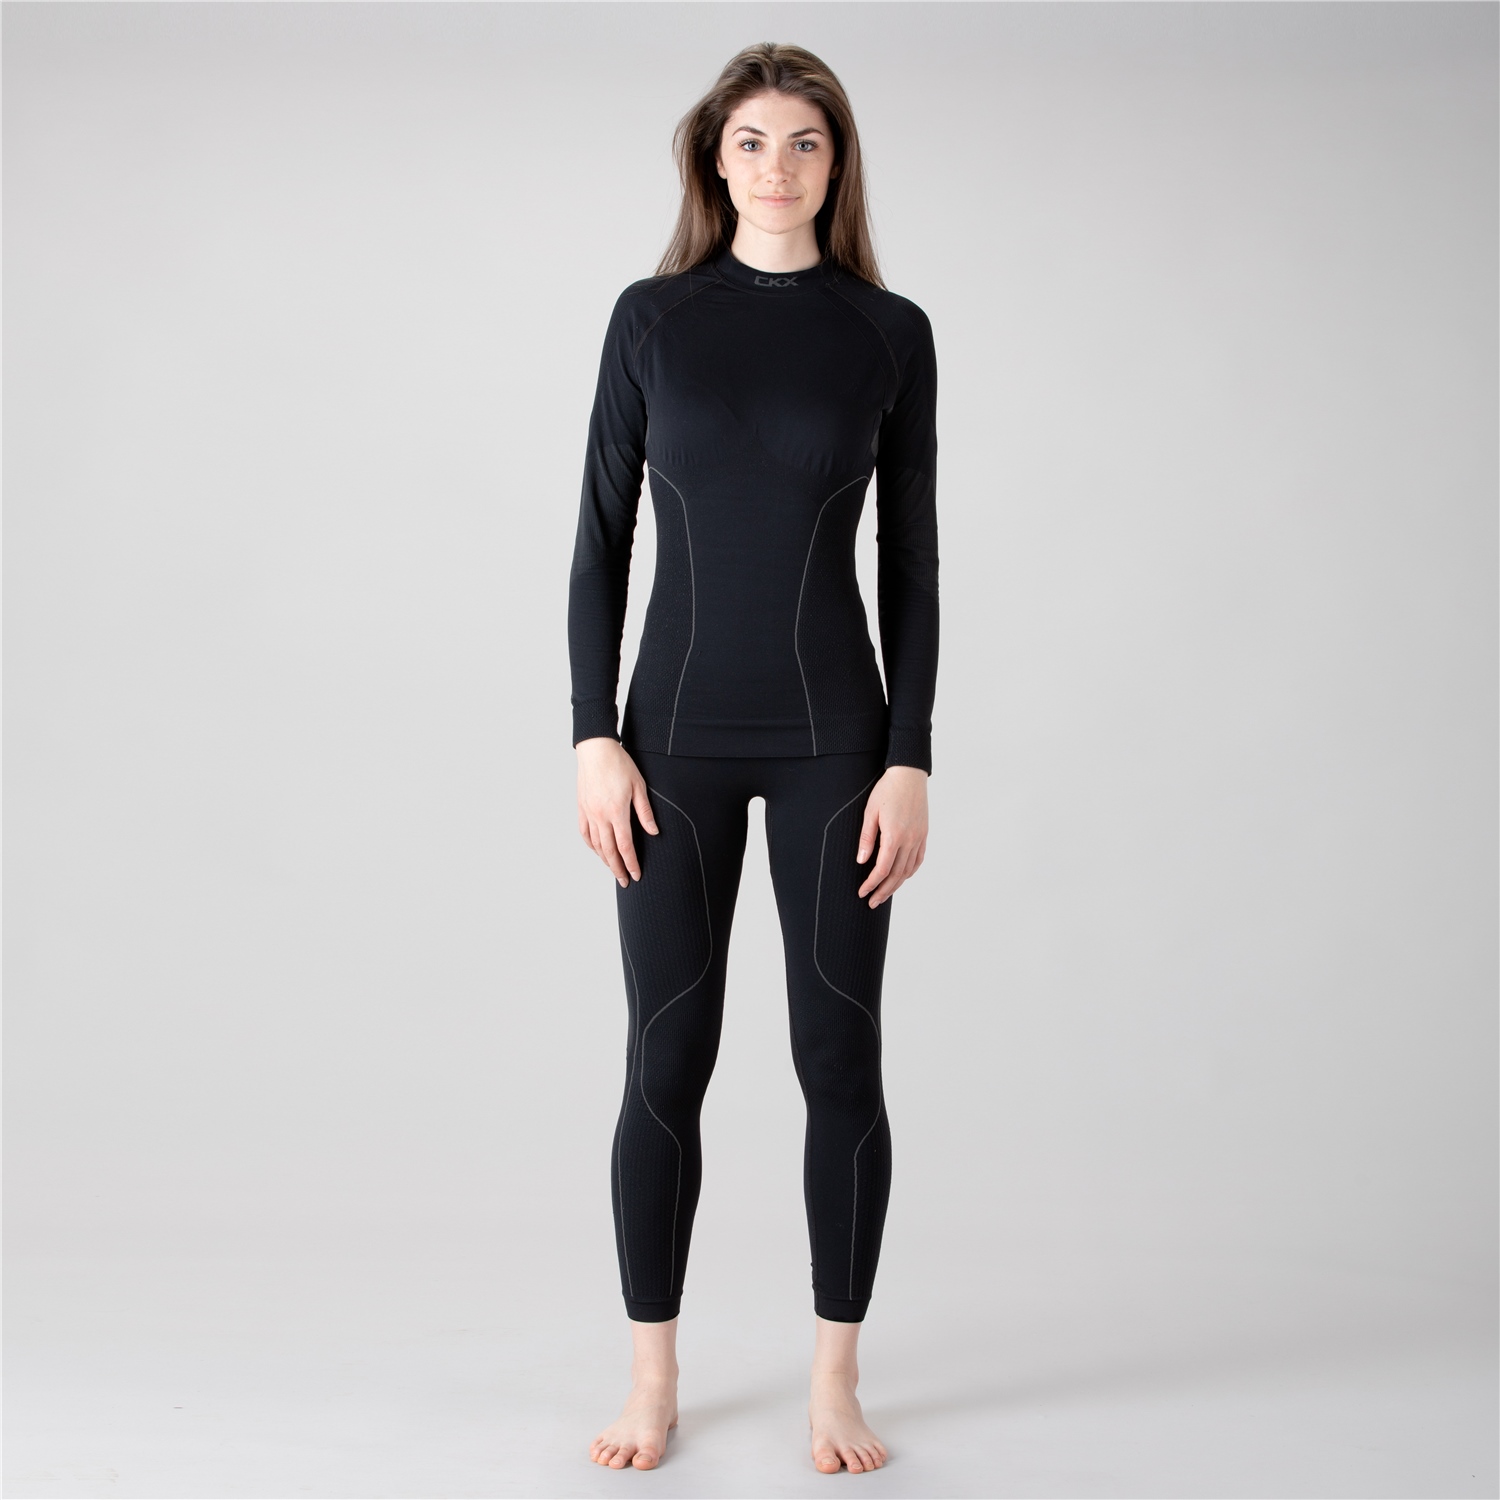 BOLKA Thermal Underwear For Women Winter Cotton Thermal Women's T